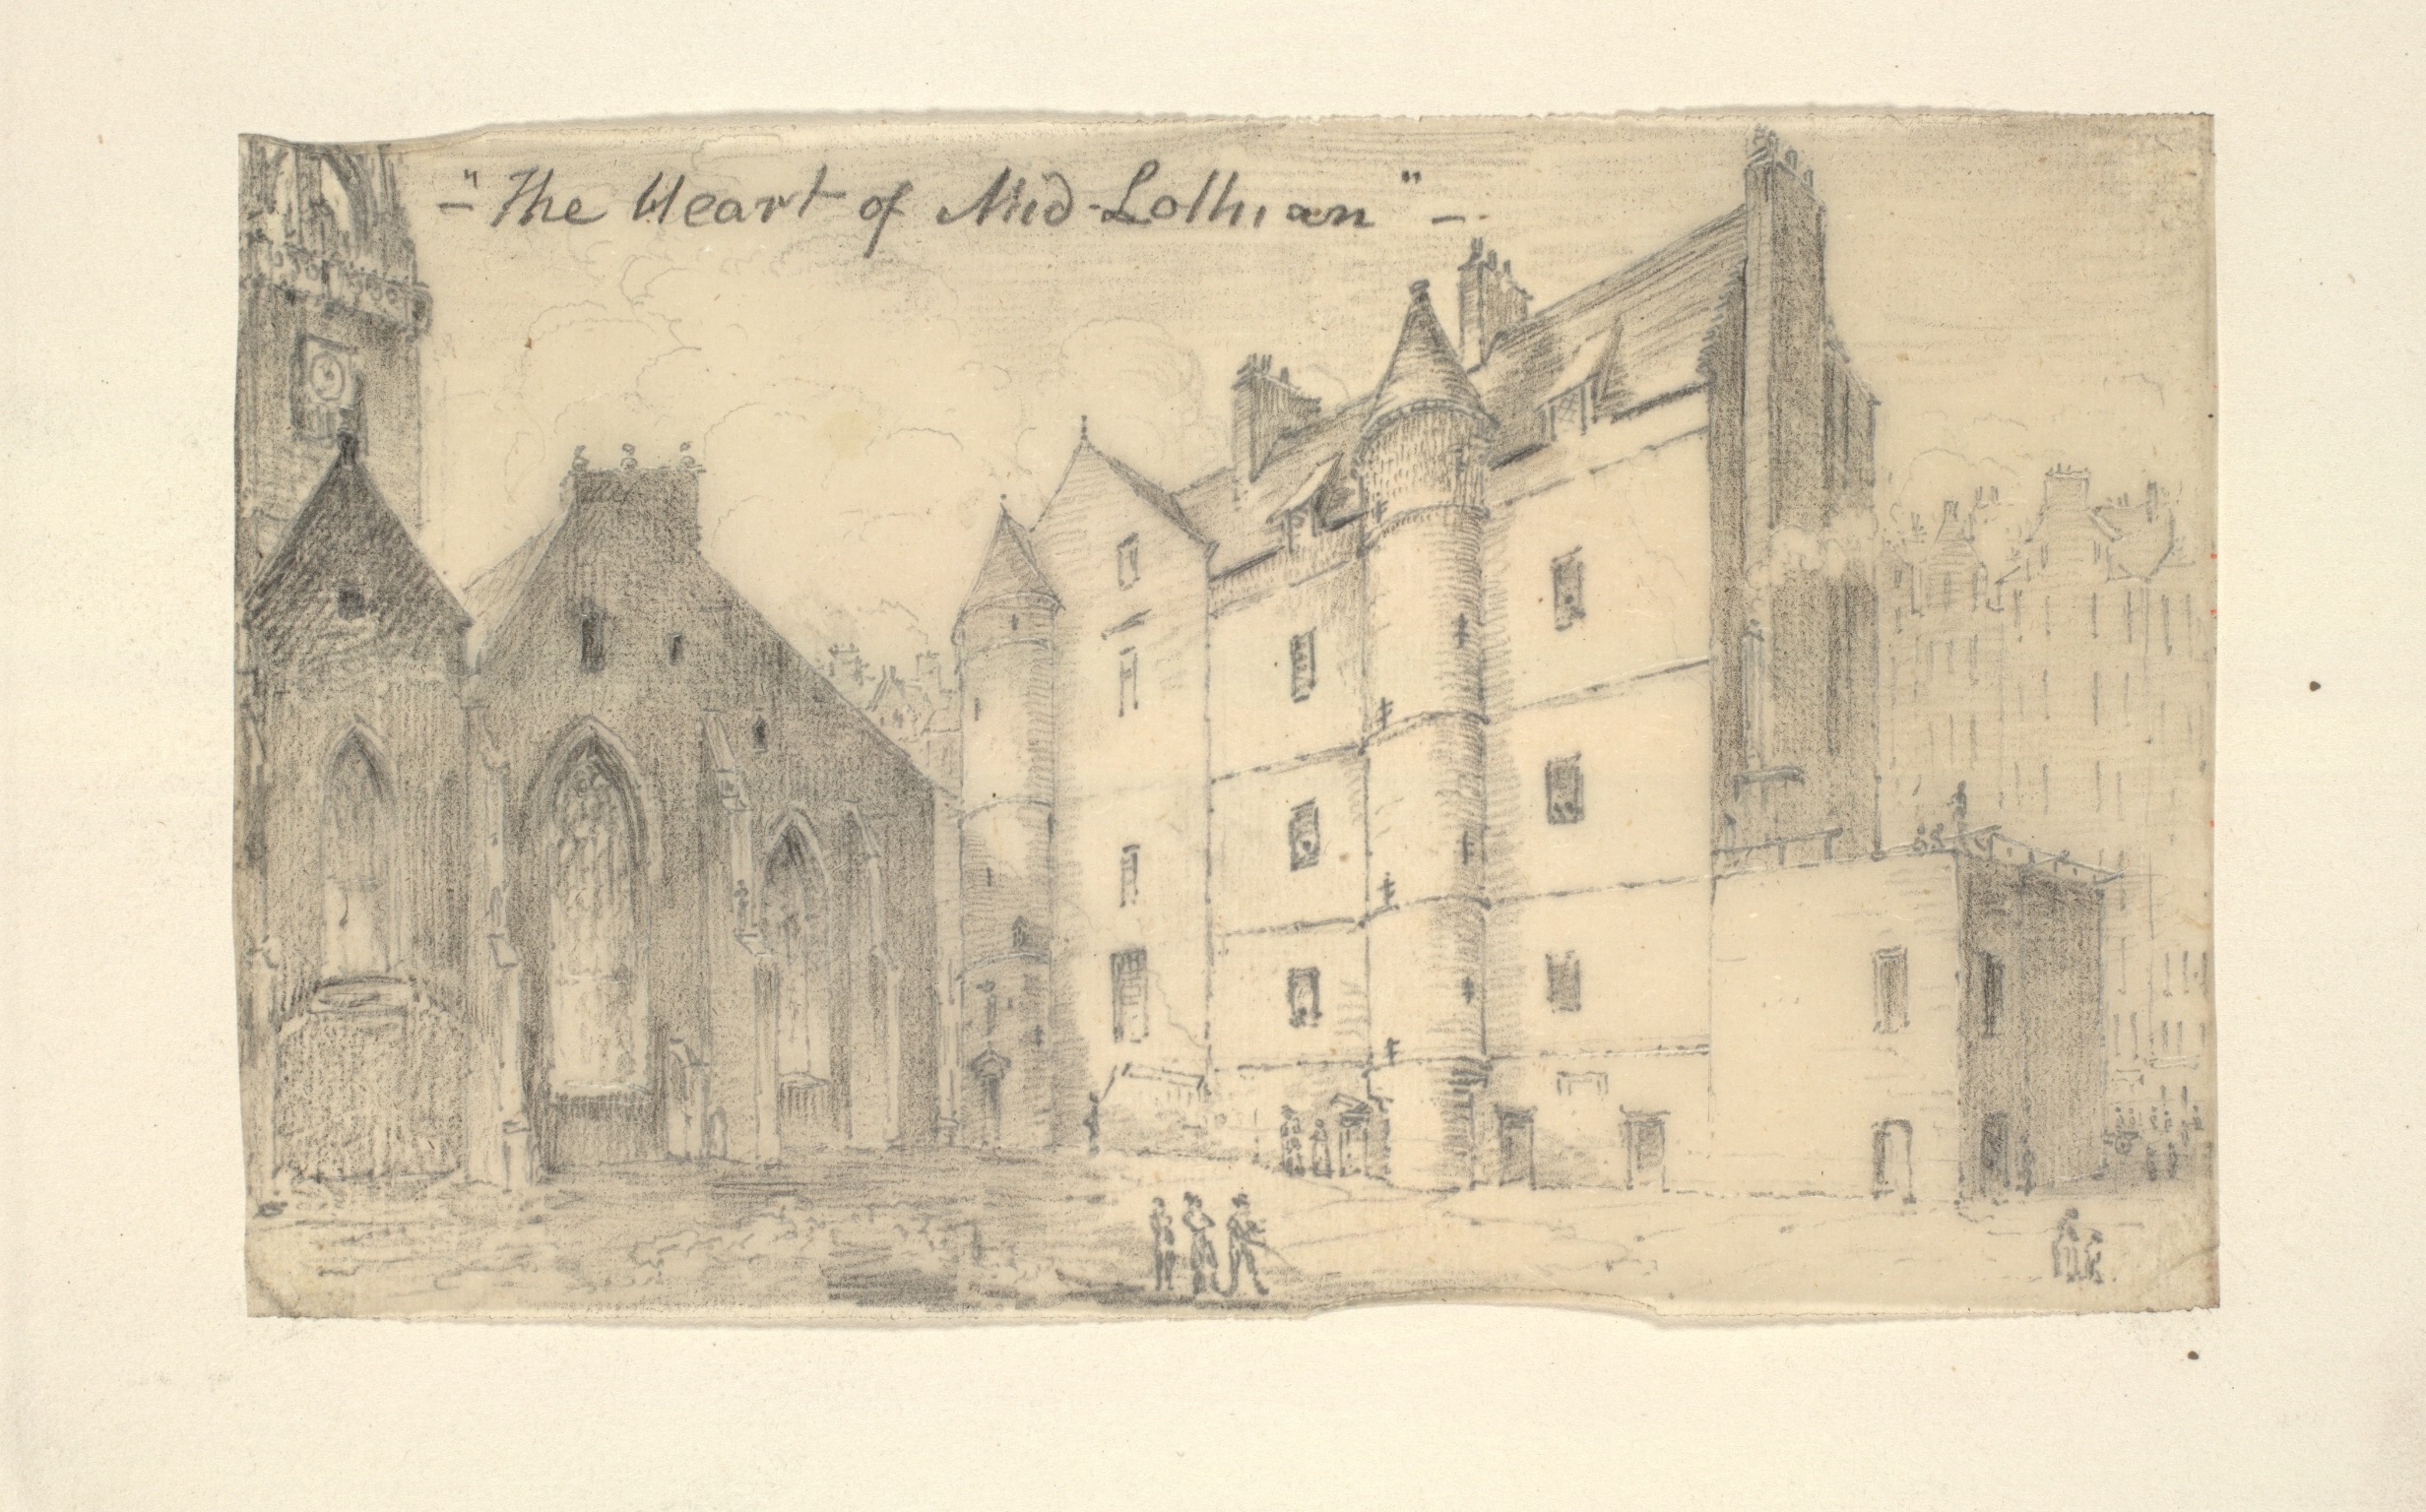 Pencil sketch showing the 'Heart of Midlothian', St Giles and parts of the High Street